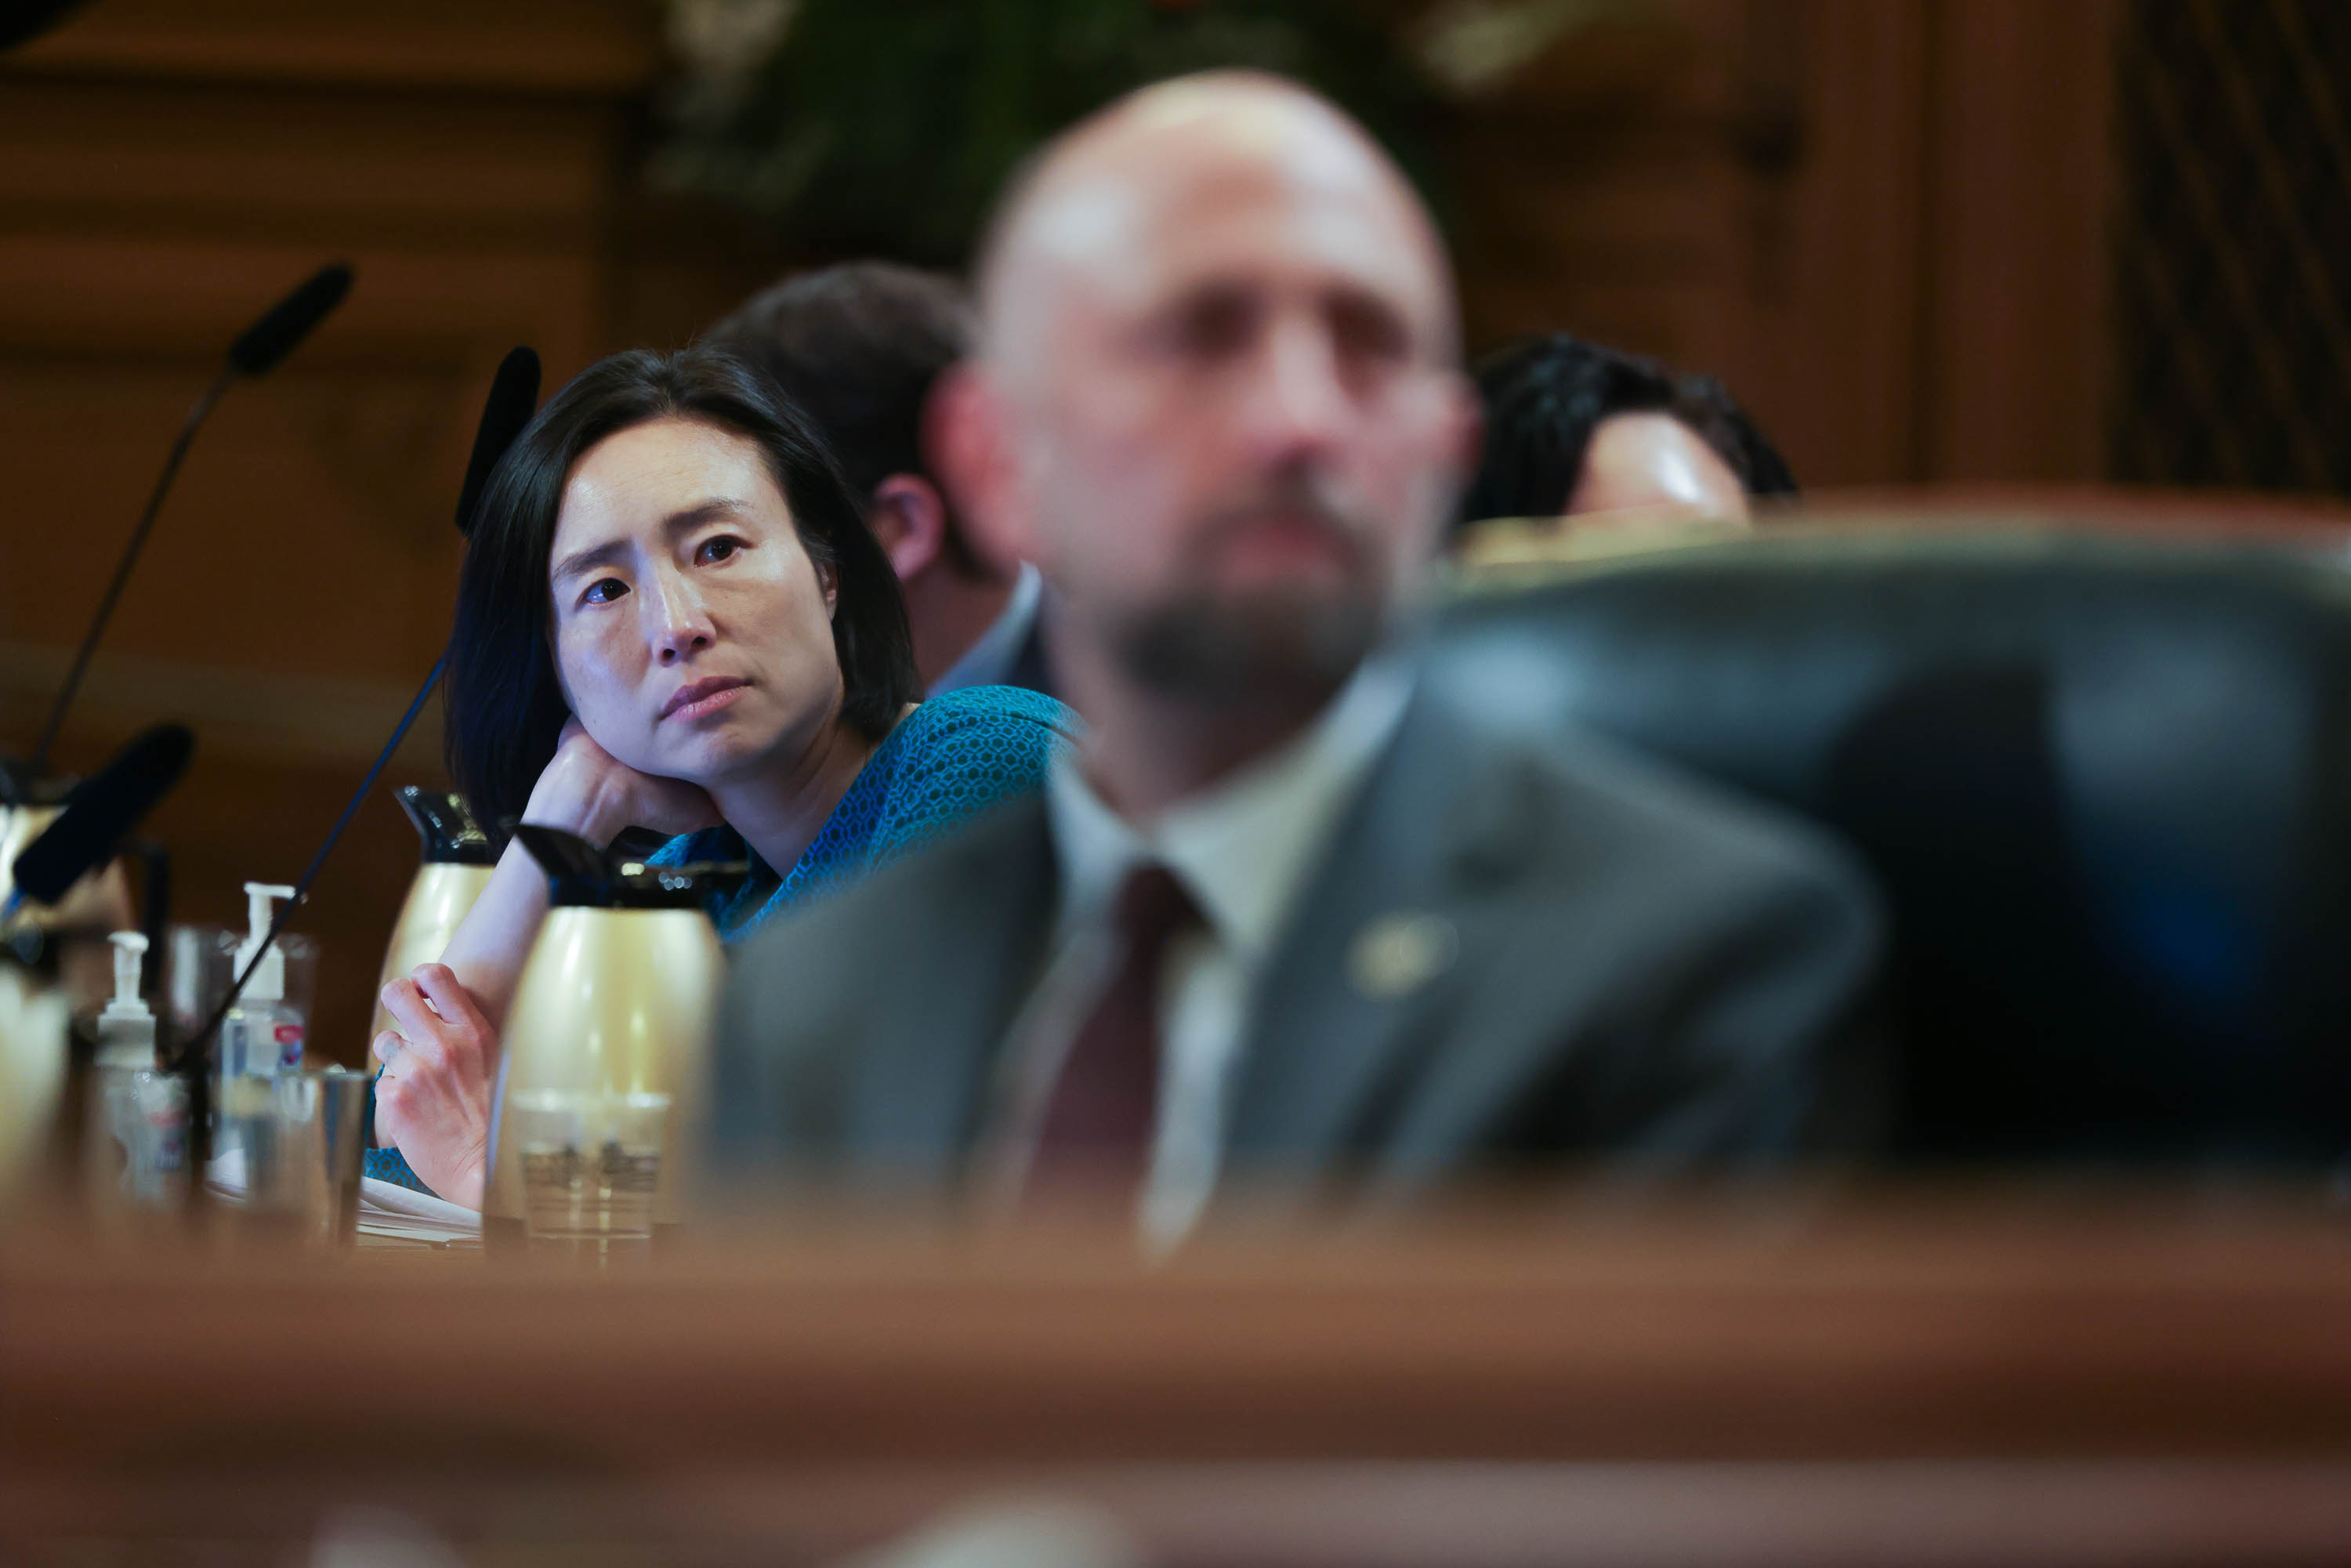 A woman in a hearing room looks pensive, surrounded by microphones and blurred foreground objects.